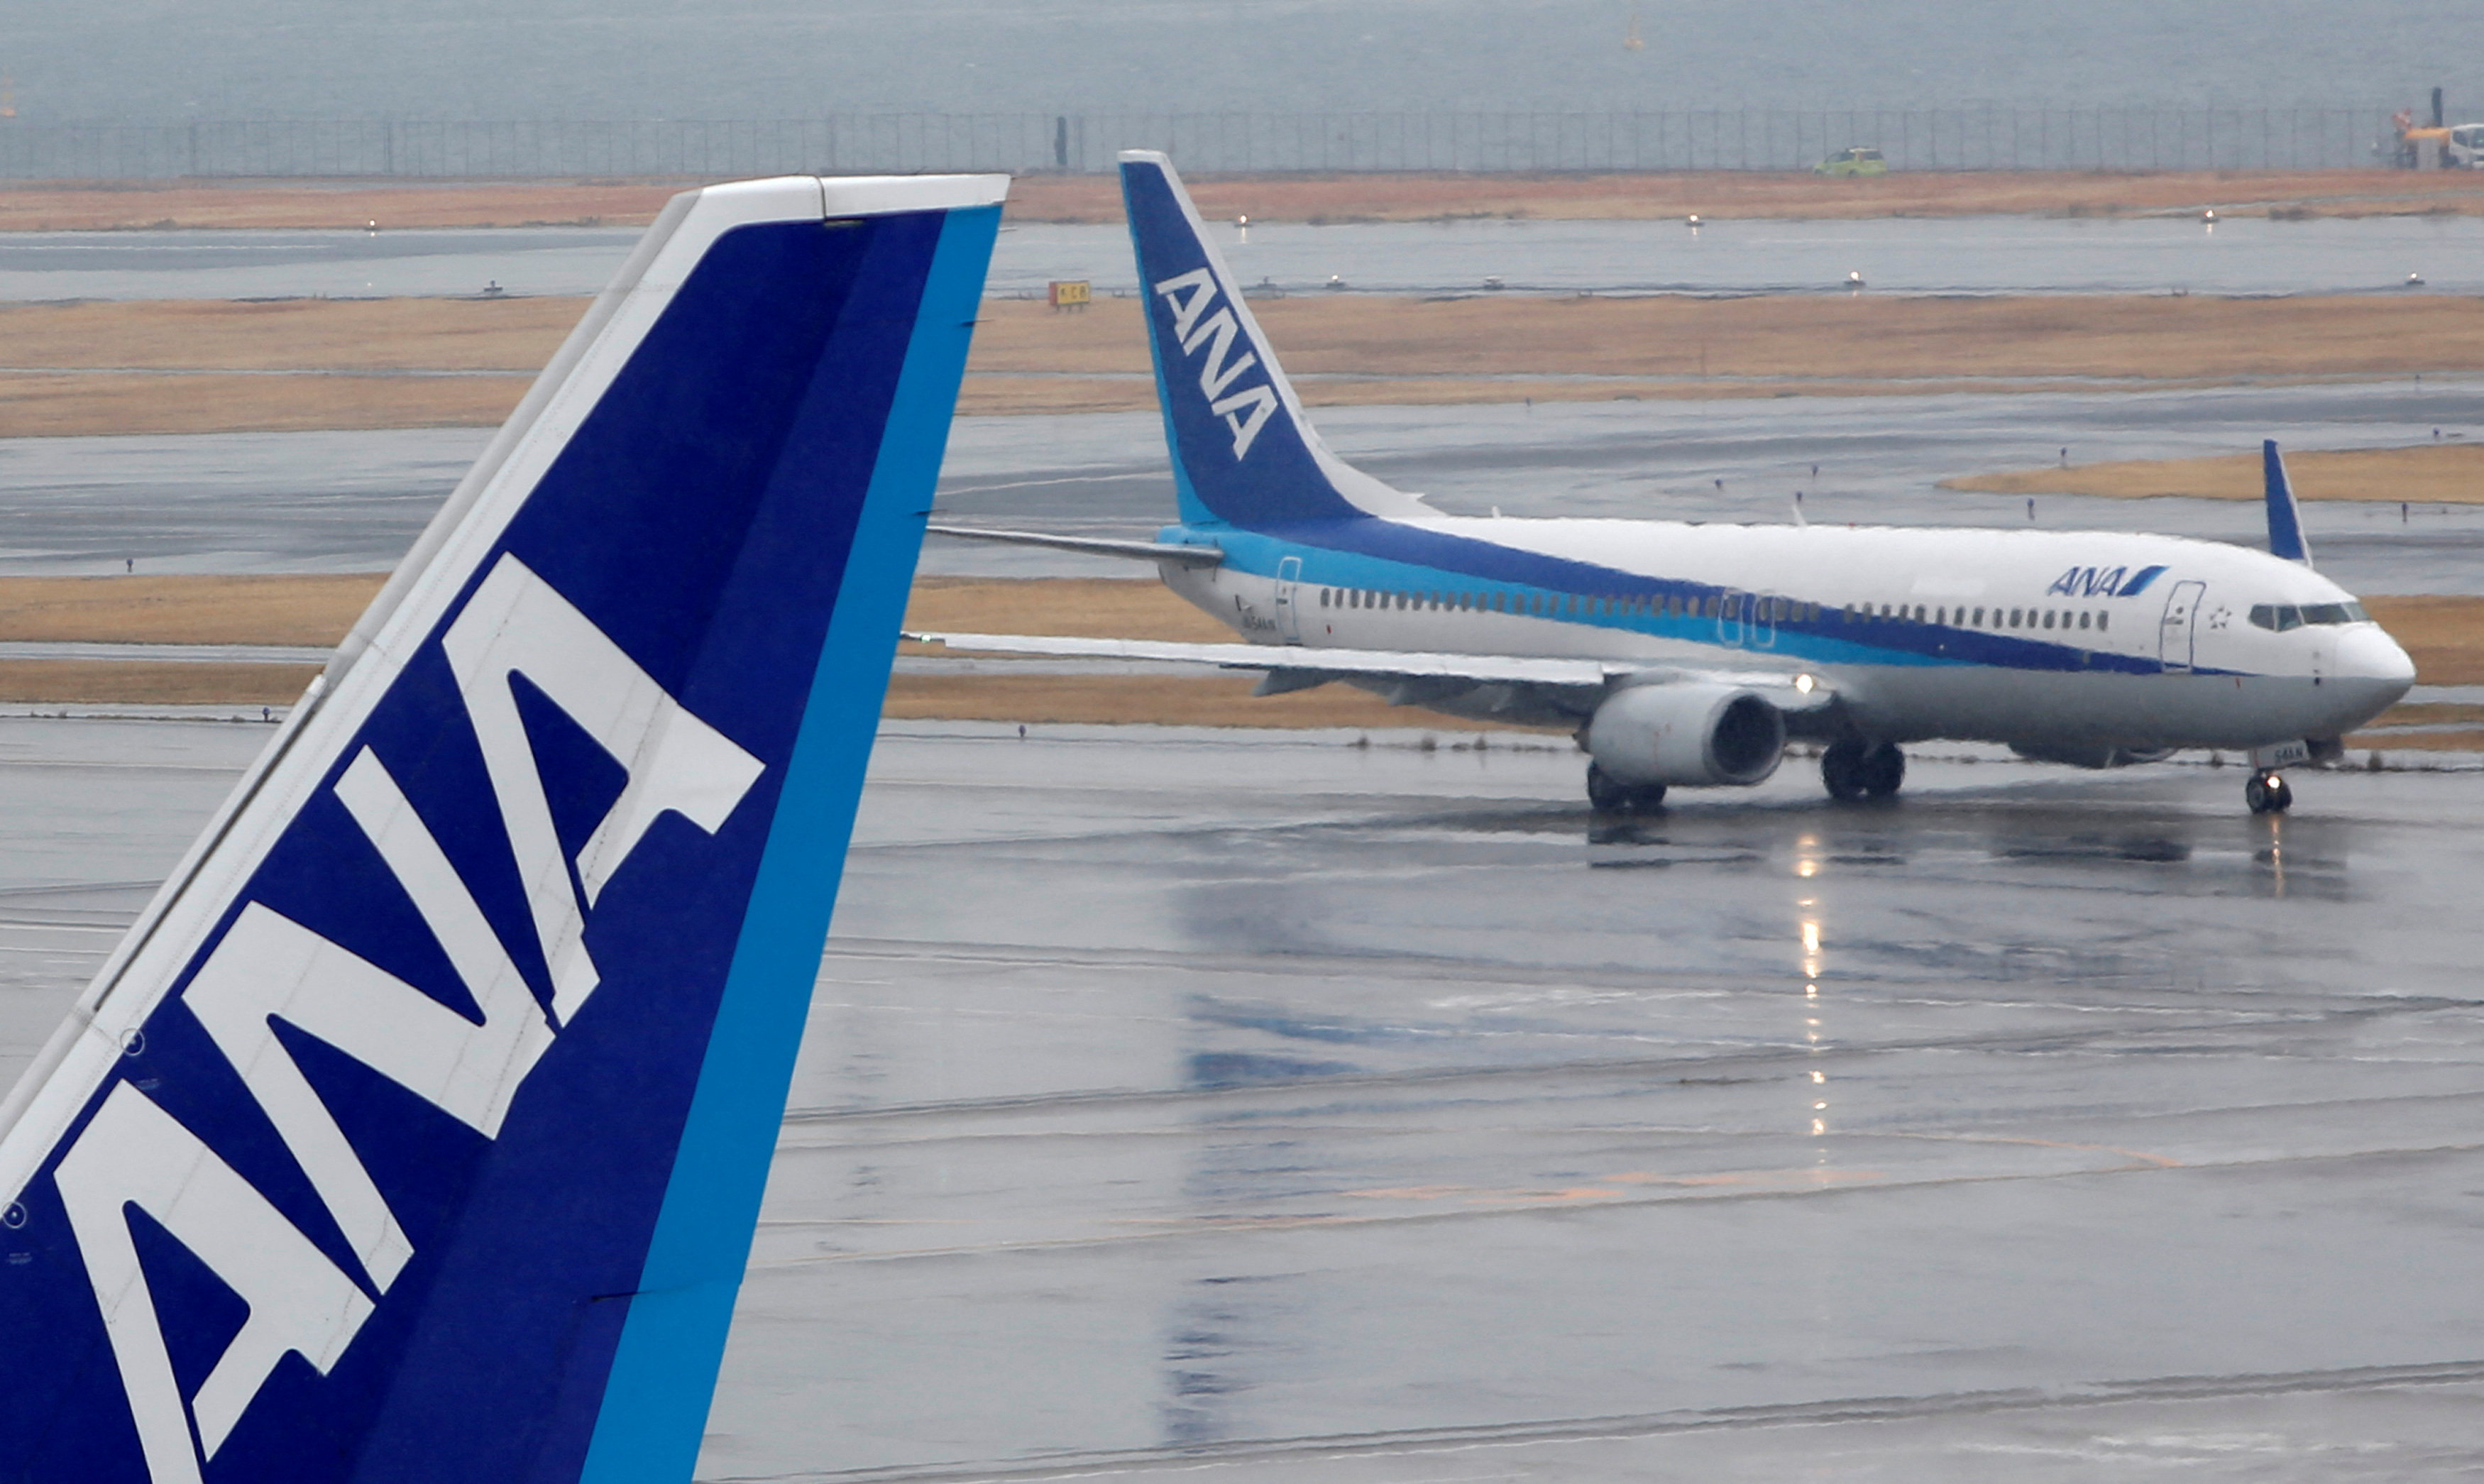 All Nippon Airways’ (ANA) planes are seen at Tokyo’s Haneda airport. Photo: Reuters